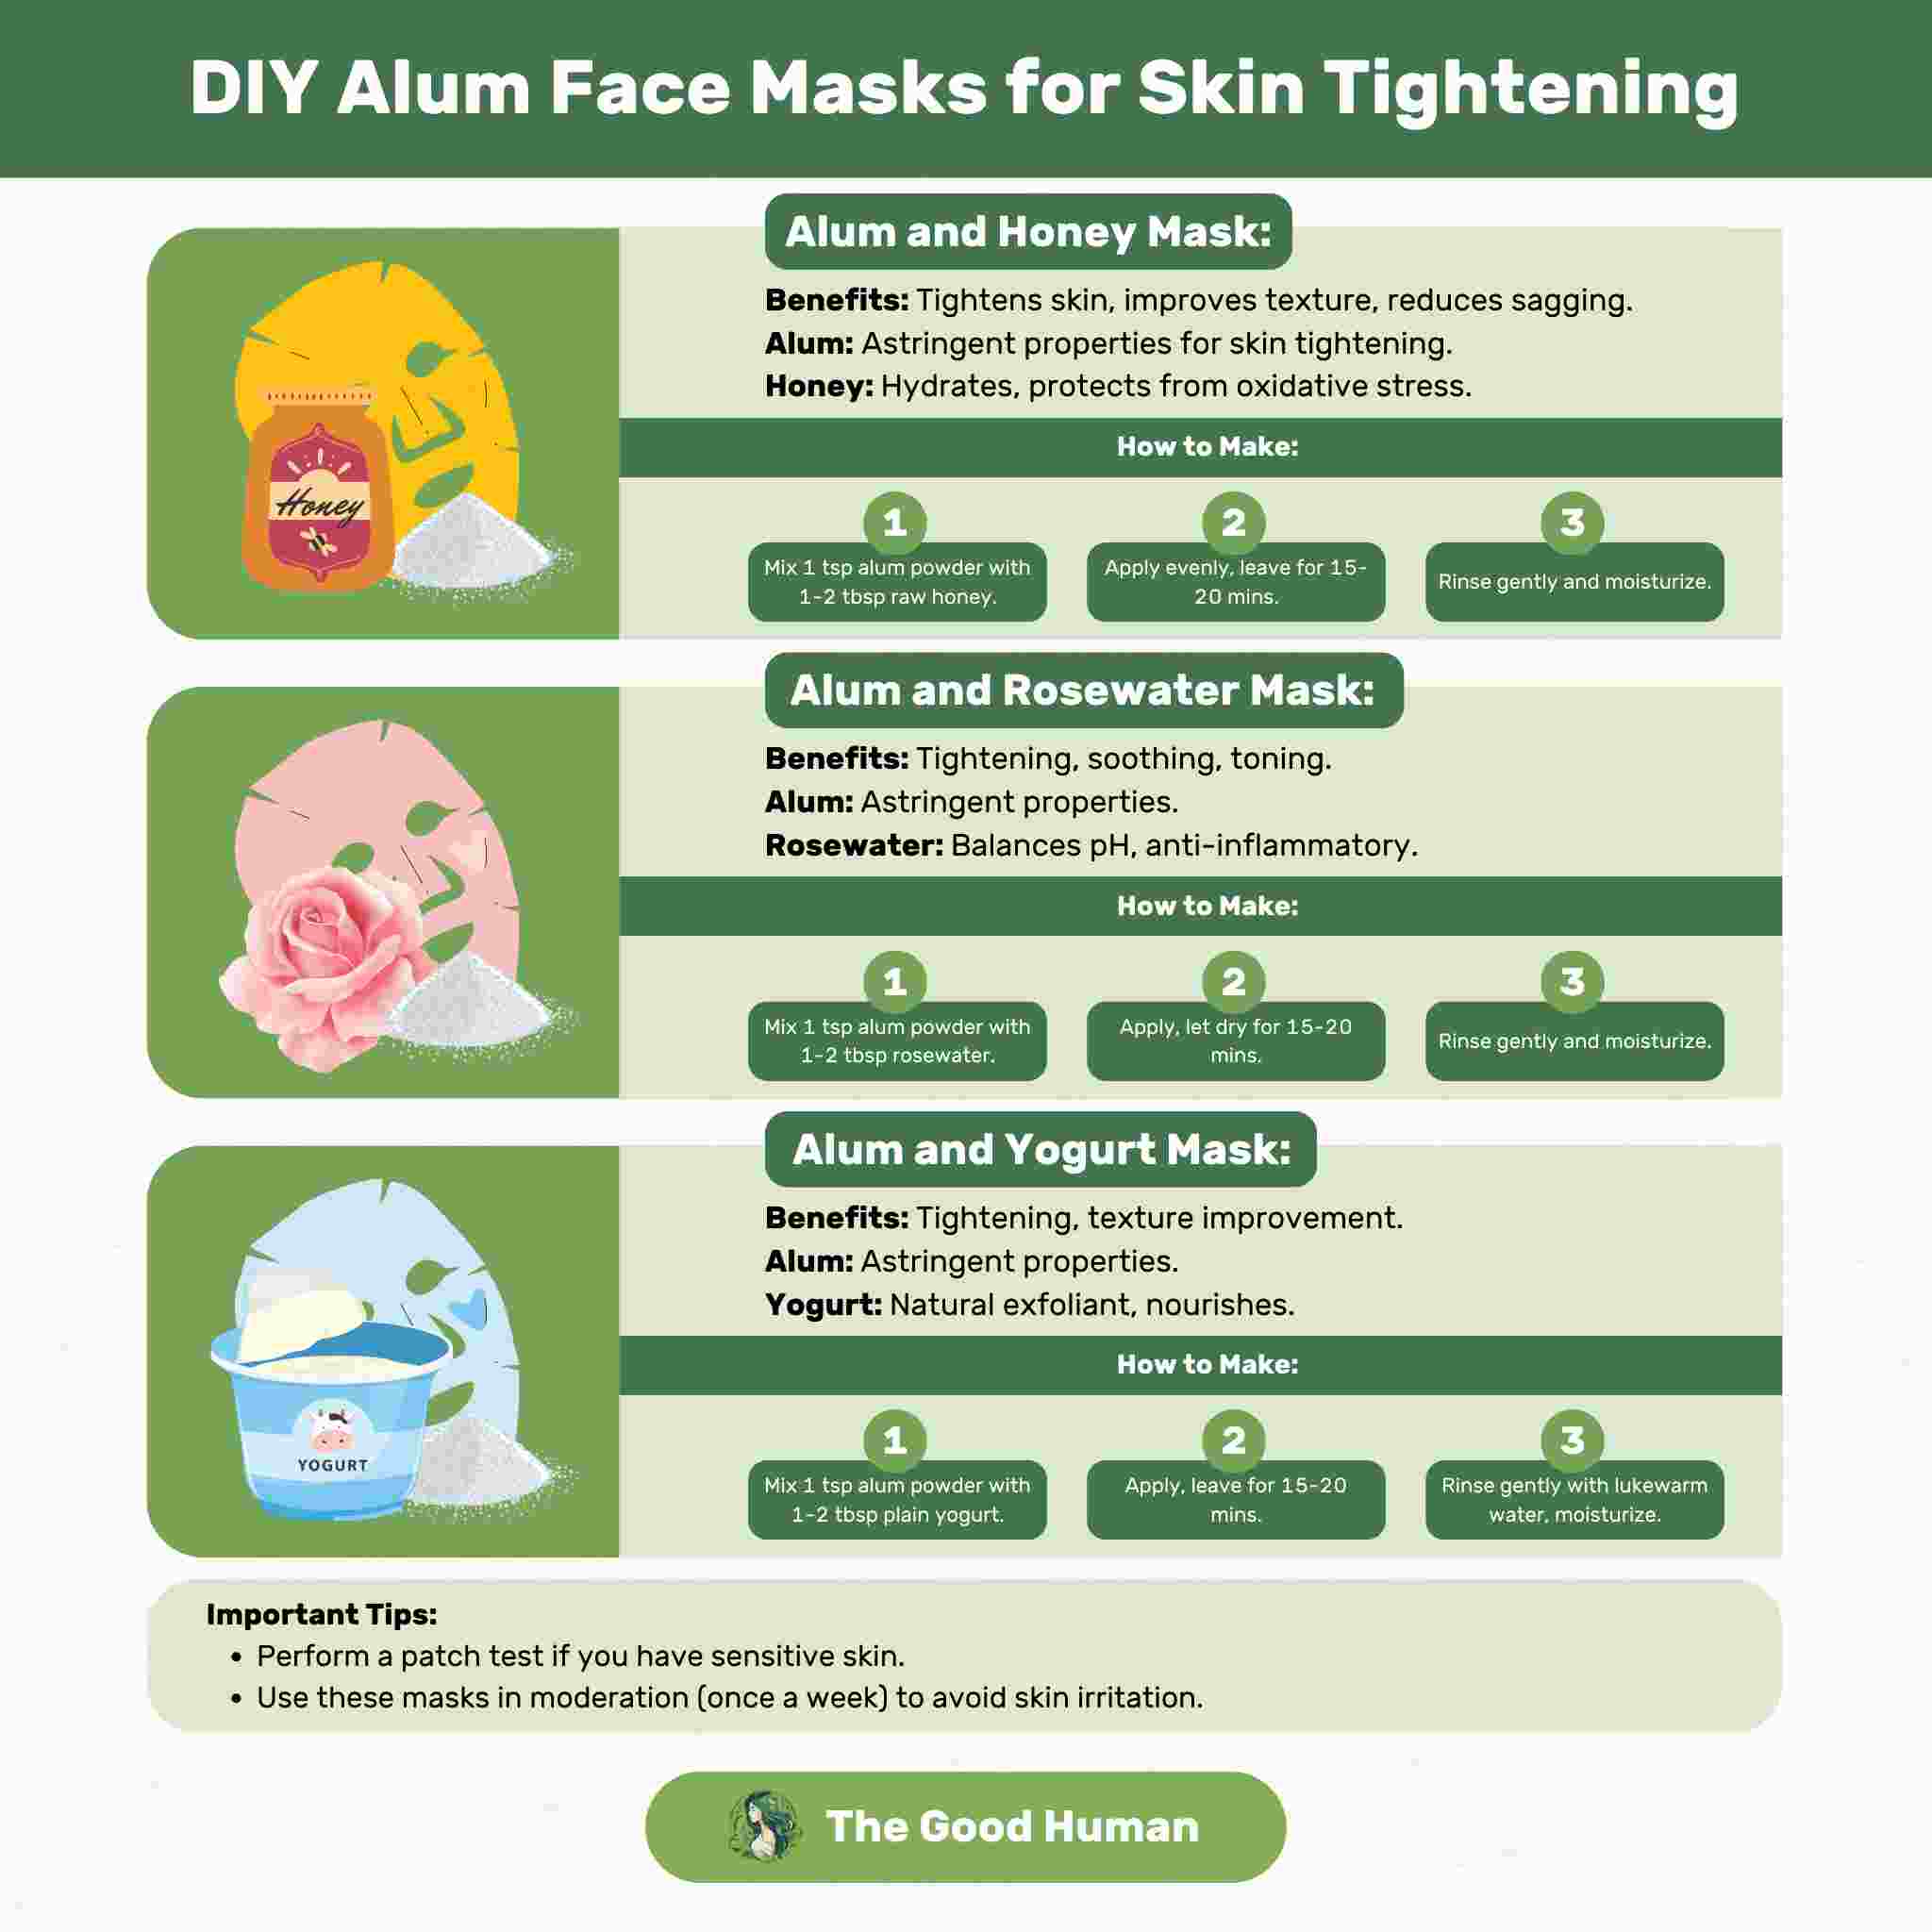 An infographic on DIY alum face masks for skin tightening.